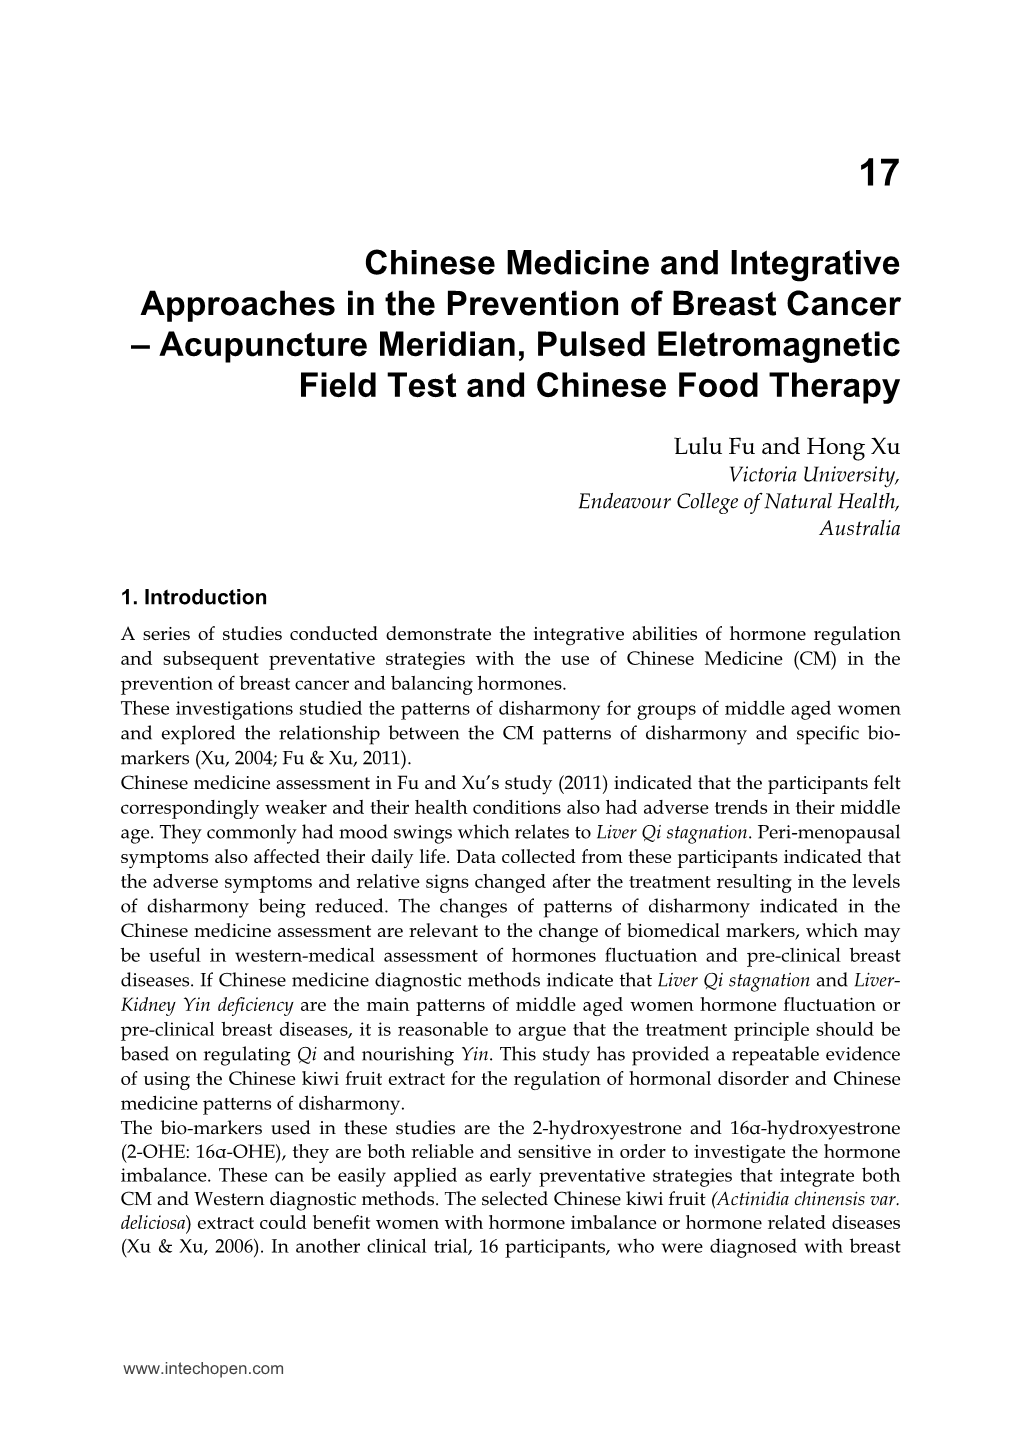 Chinese Medicine and Integrative Approaches in the Prevention of Breast Cancer – Acupuncture Meridian, Pulsed Eletromagnetic Field Test and Chinese Food Therapy